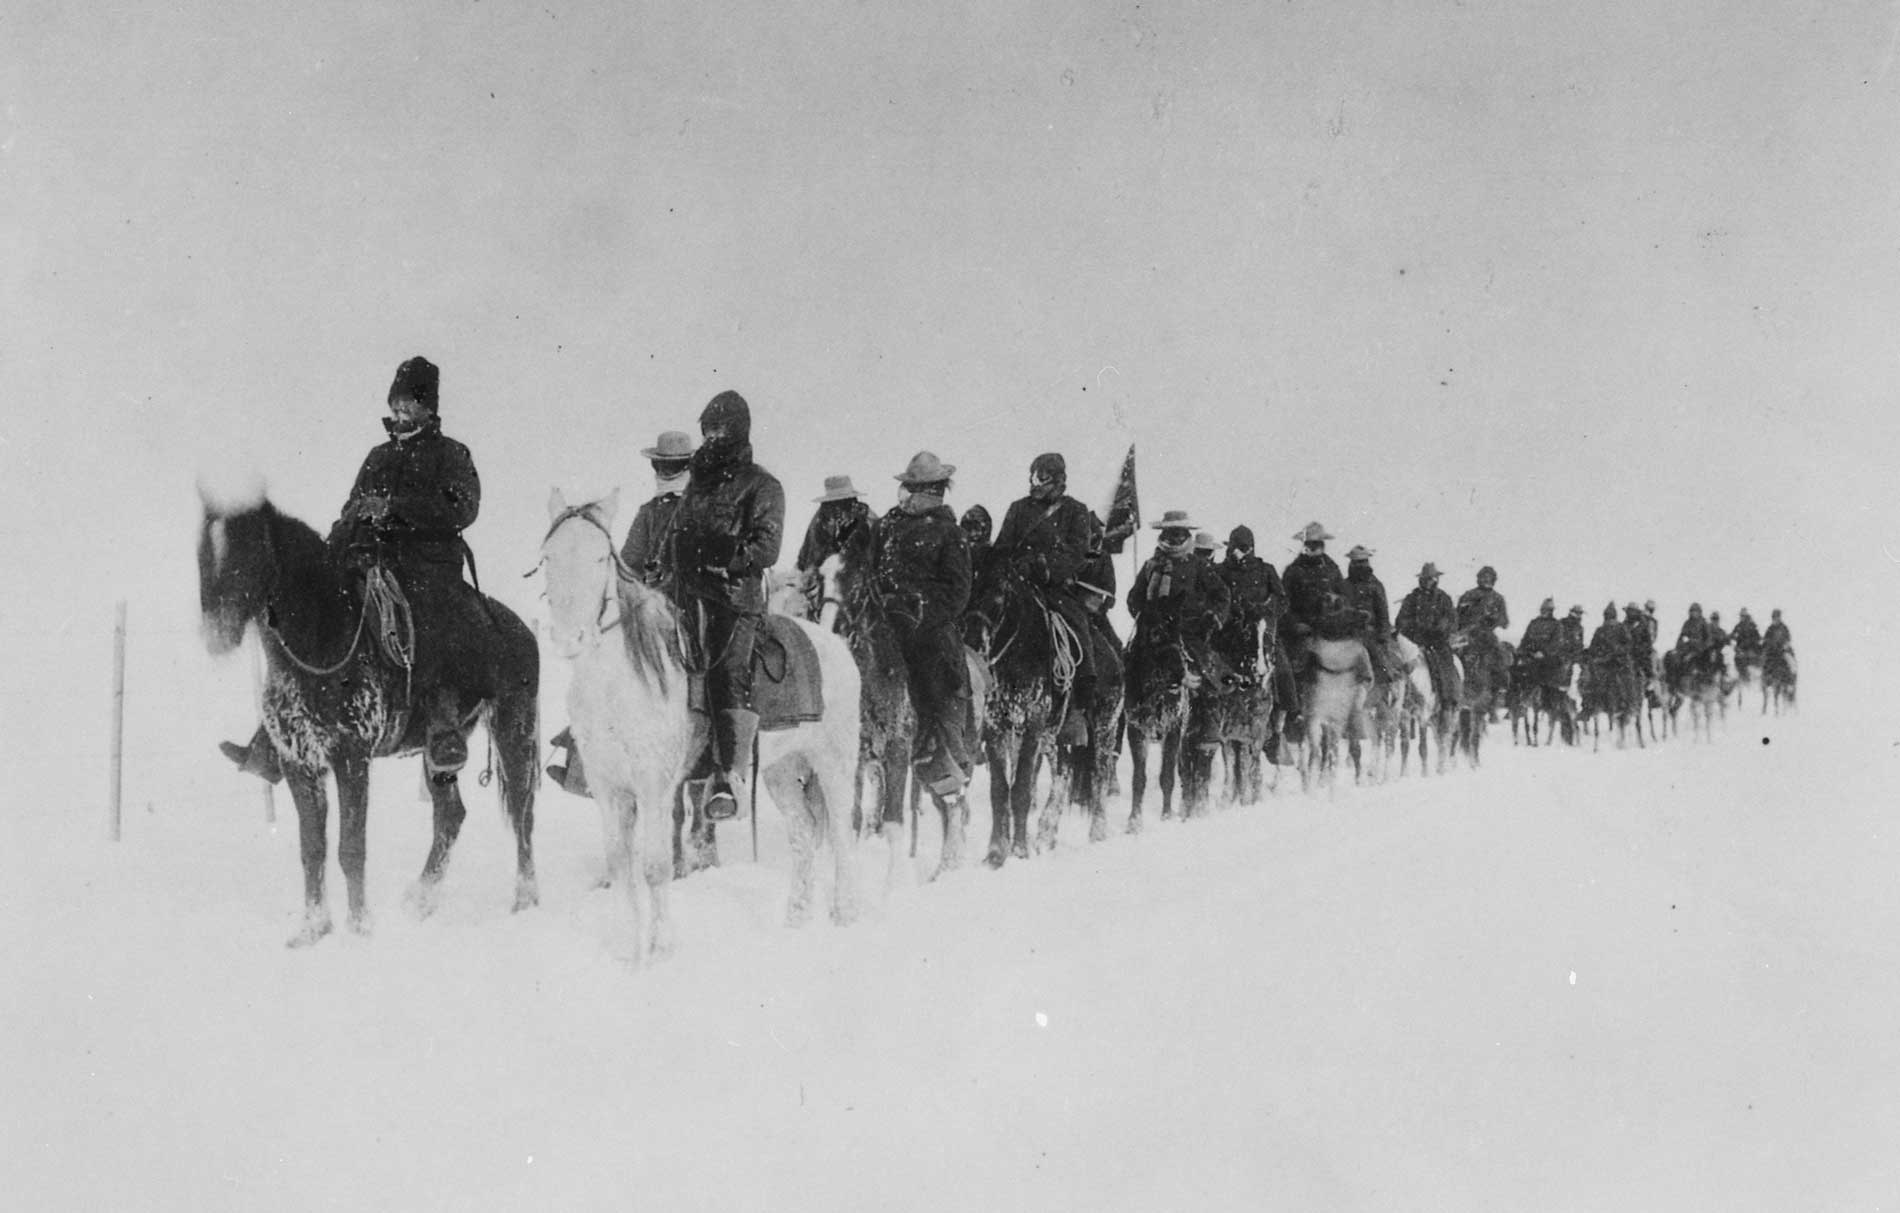 Lt. Edward W. Casey’s Cheyenne Army Scouts ride on horseback, returning from the Pine Ridge Indian Reservation during a blizzard. (Photo courtesy of the National Archives.)